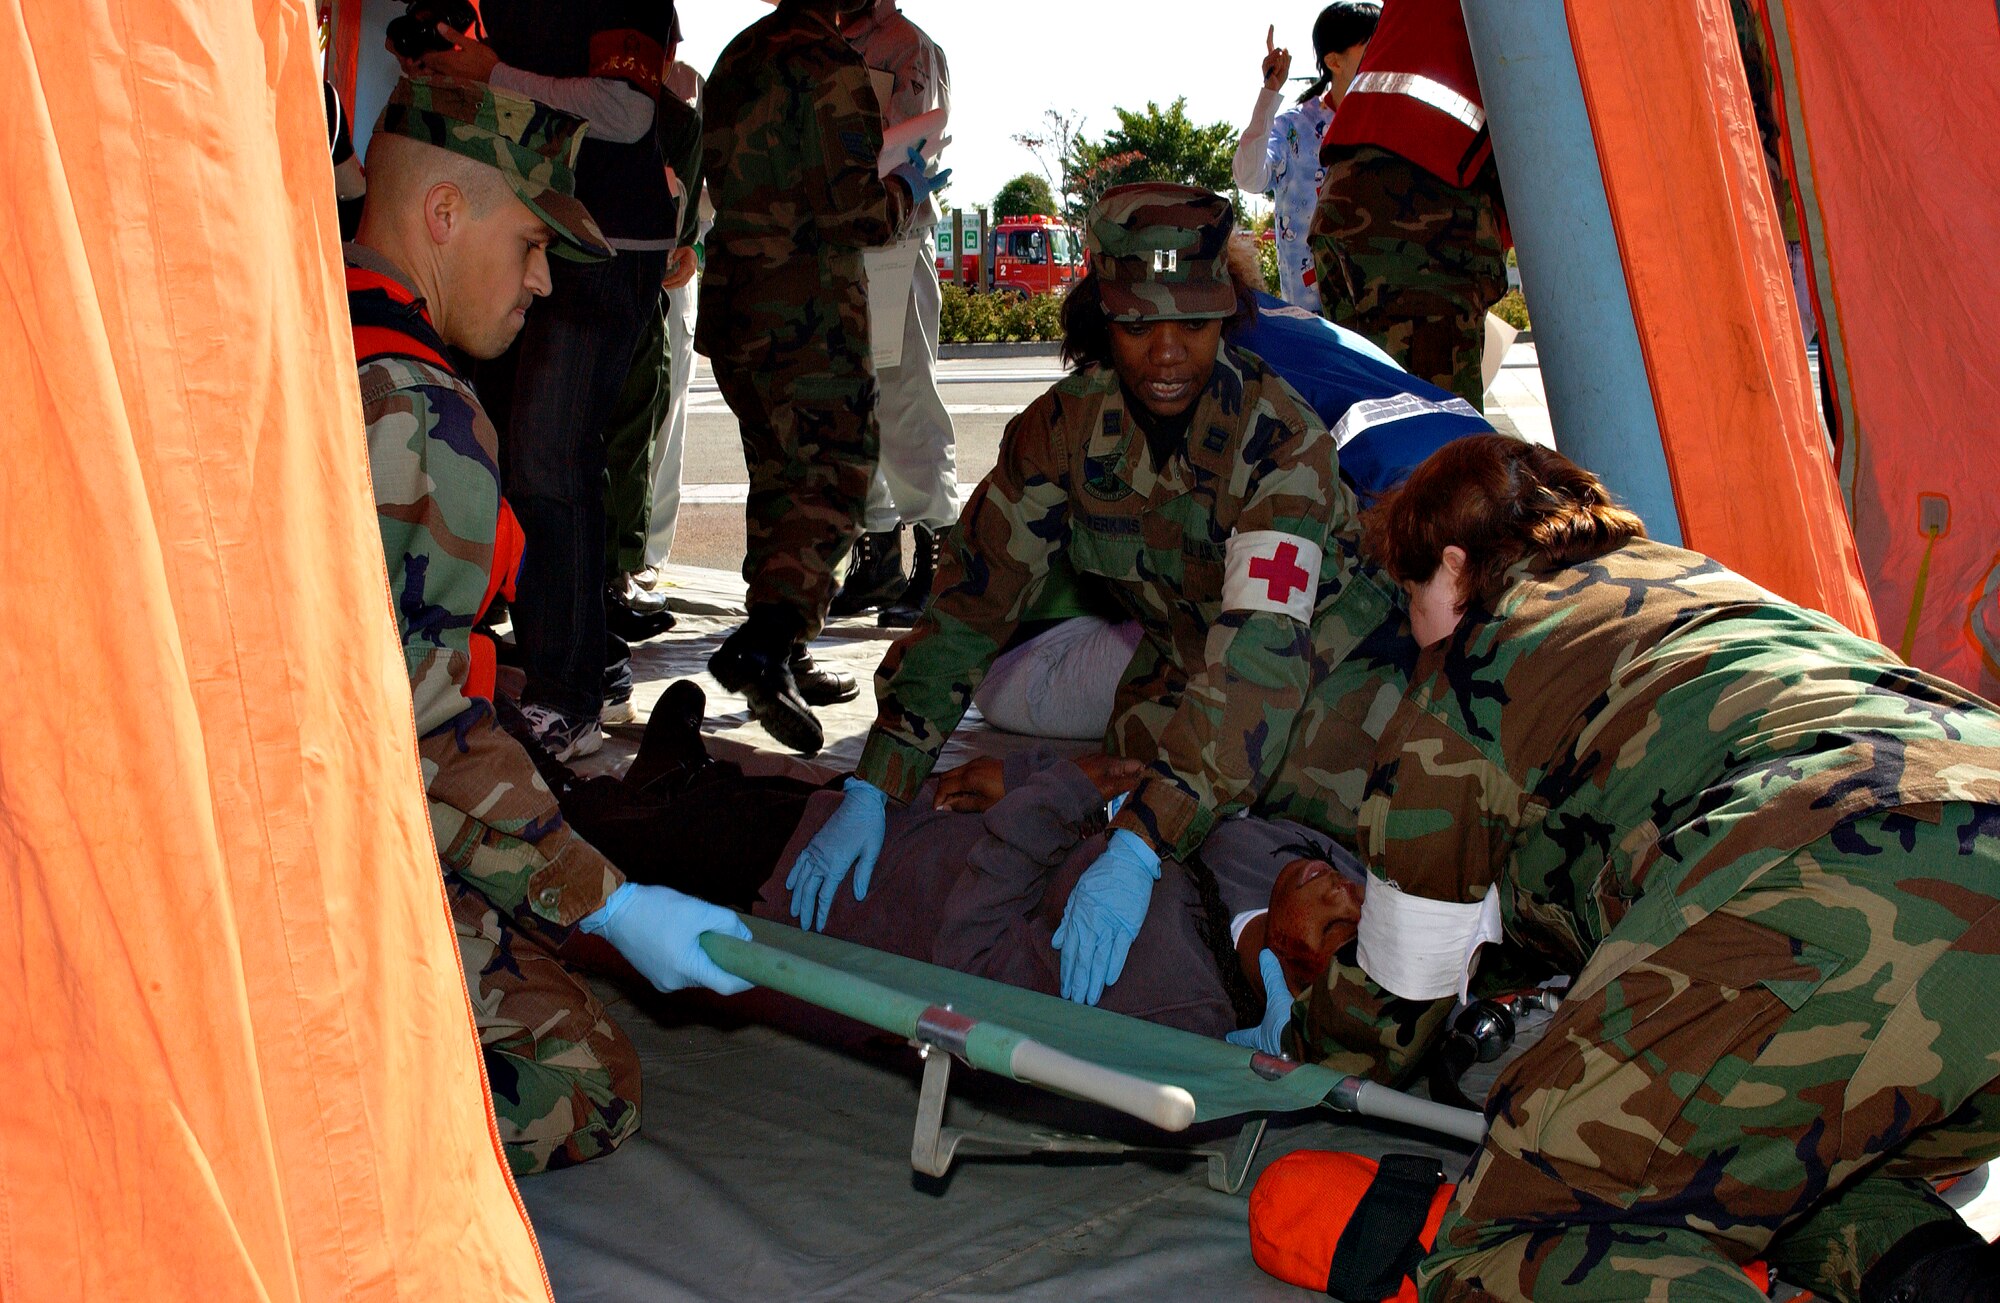 MISAWA AIR BASE, Japan -- Petty Officer 2nd Class Orlando Garcia, Capt. Mefter Perkins and Capt. Deborah Hoffman prepare a victim for transport as part of the Misawa City Disaster Preparation Exercise at the Misawa Ice Arena Oct. 14, 2007. 
(US Air Force photo by Airman 1st Class Eric Harris)(RELEASED)